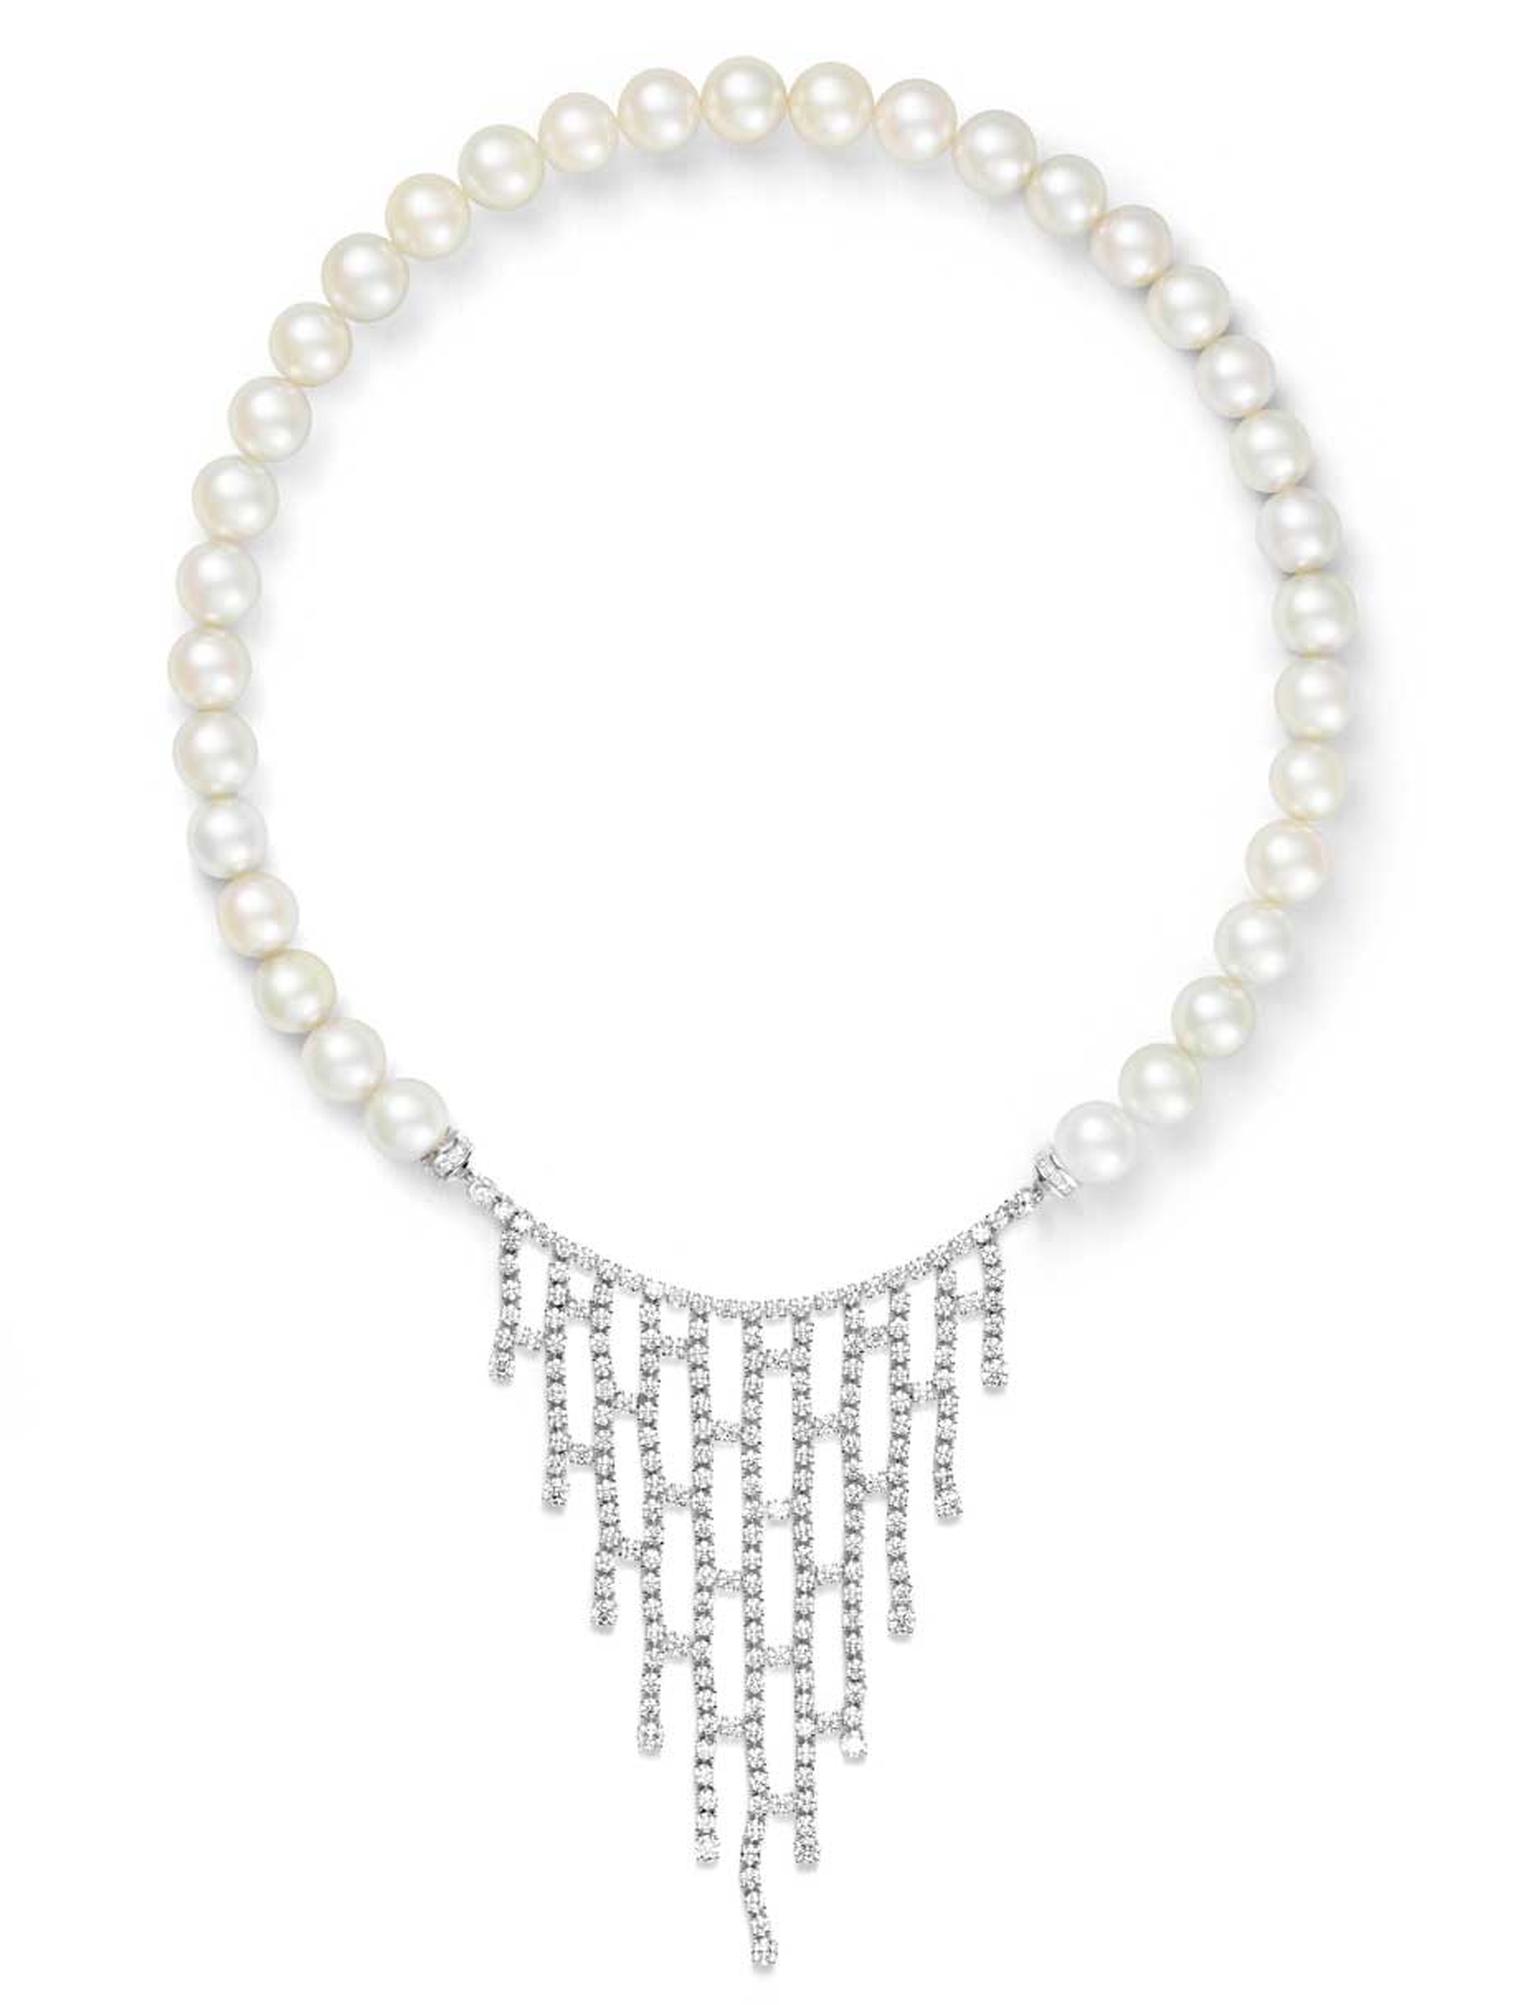 Alexander Arne pearl and diamond necklace, from the Transformer collection, which can be disassembled and worn as a pearl strand.